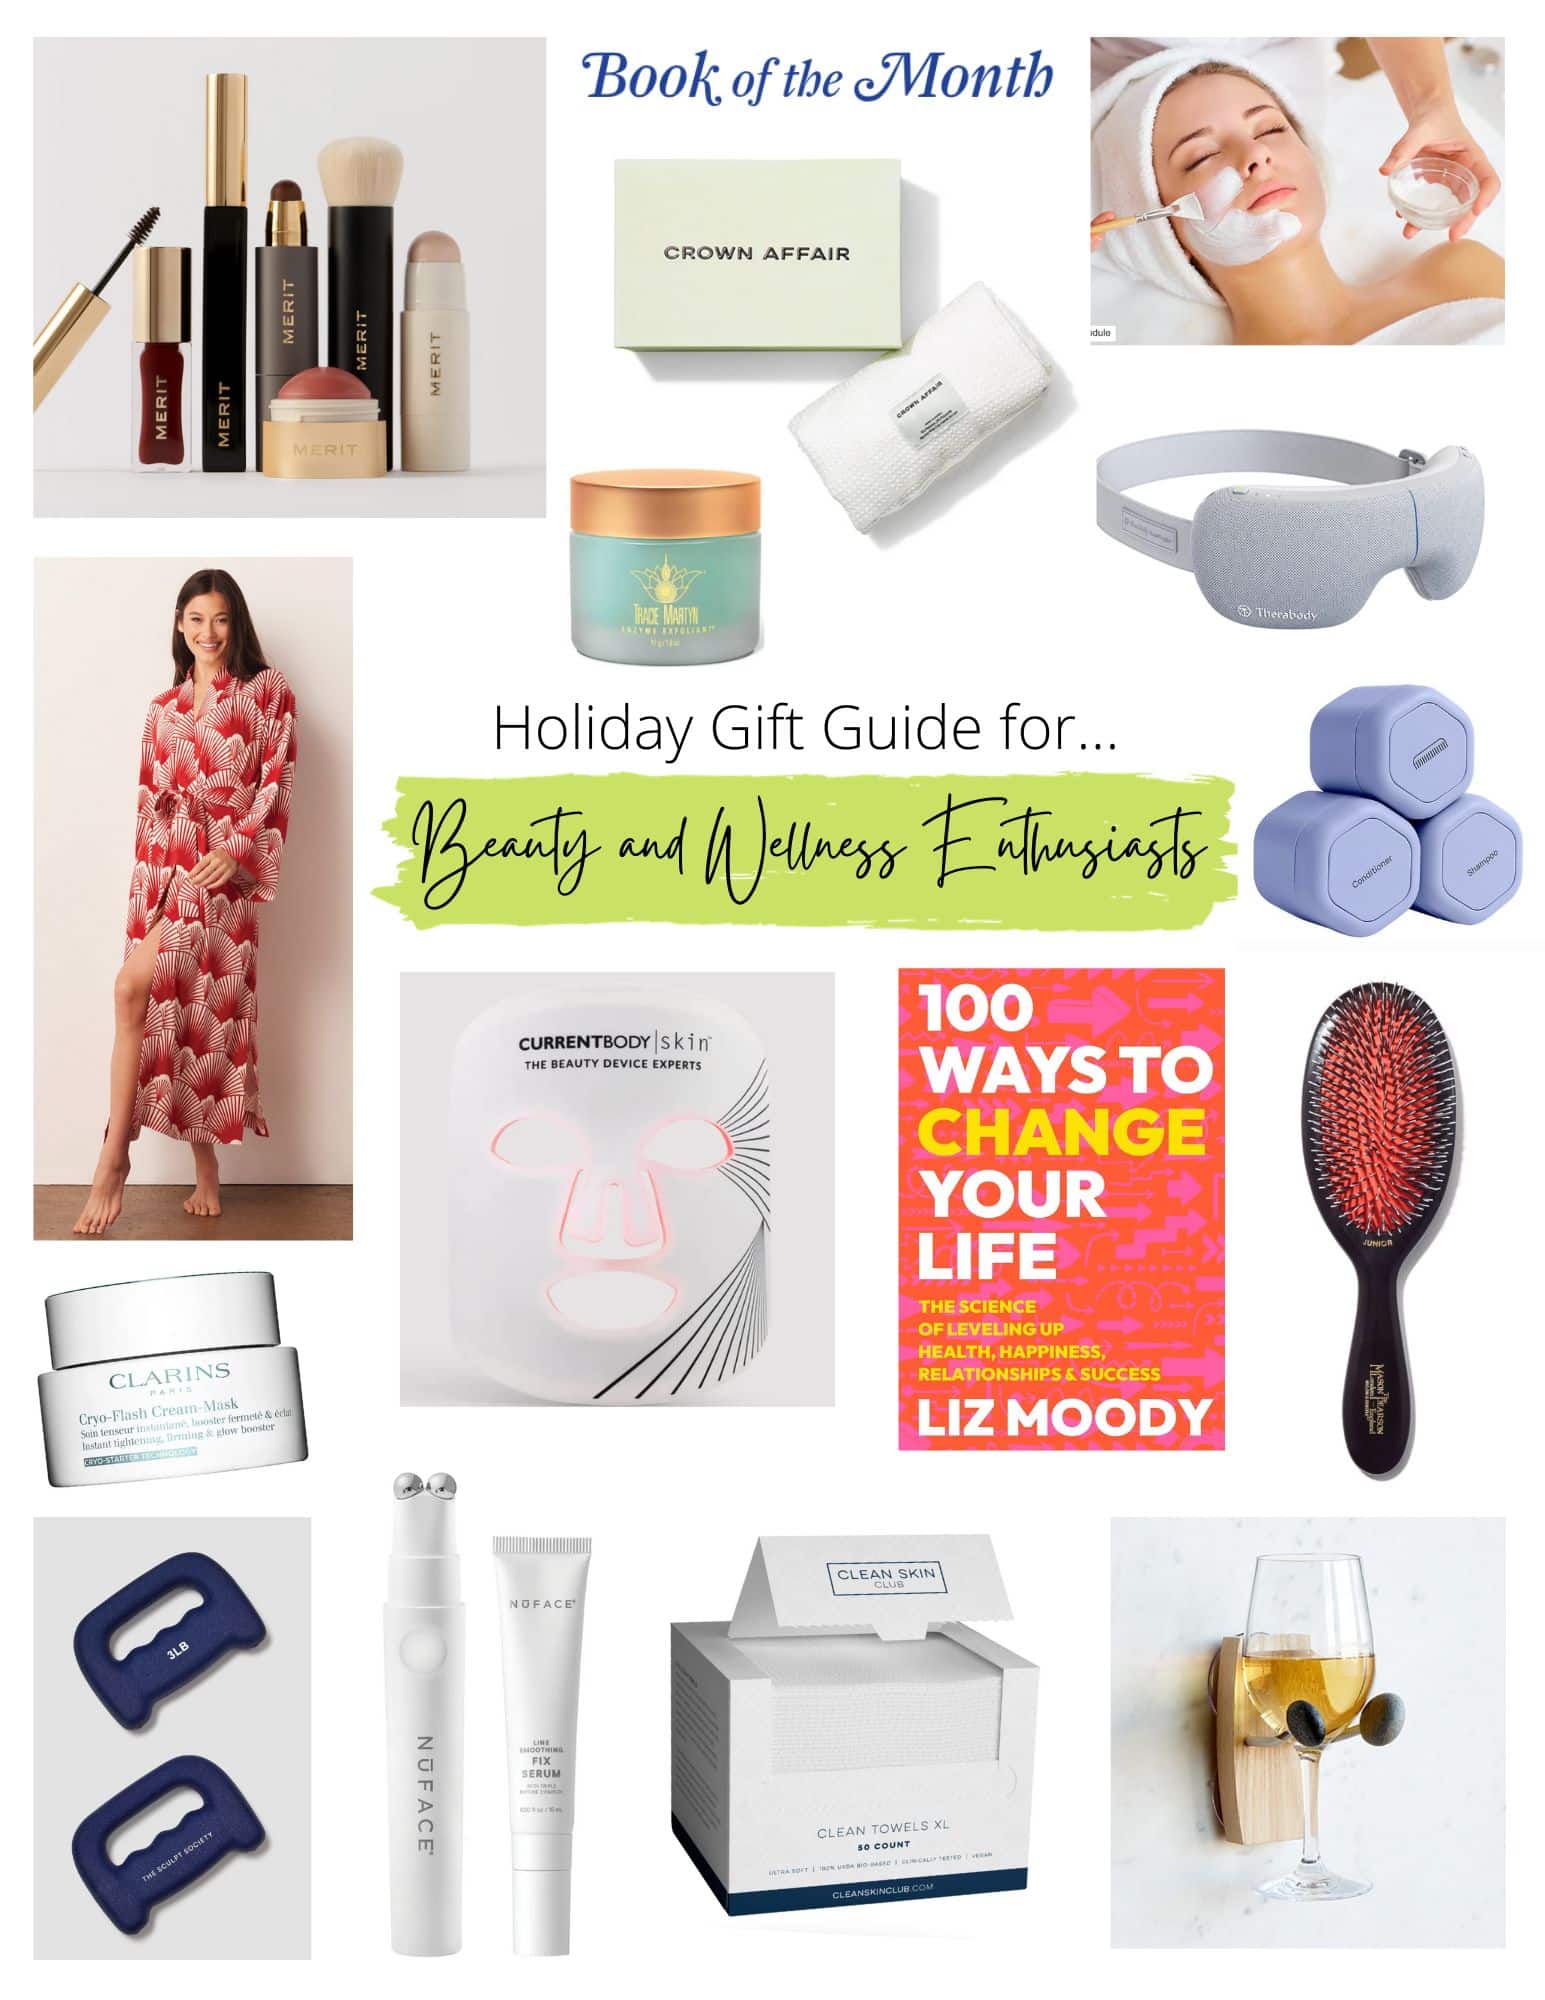 Holiday Gift Guide no. 3 - Gifts for the Home - Love Grows Wild